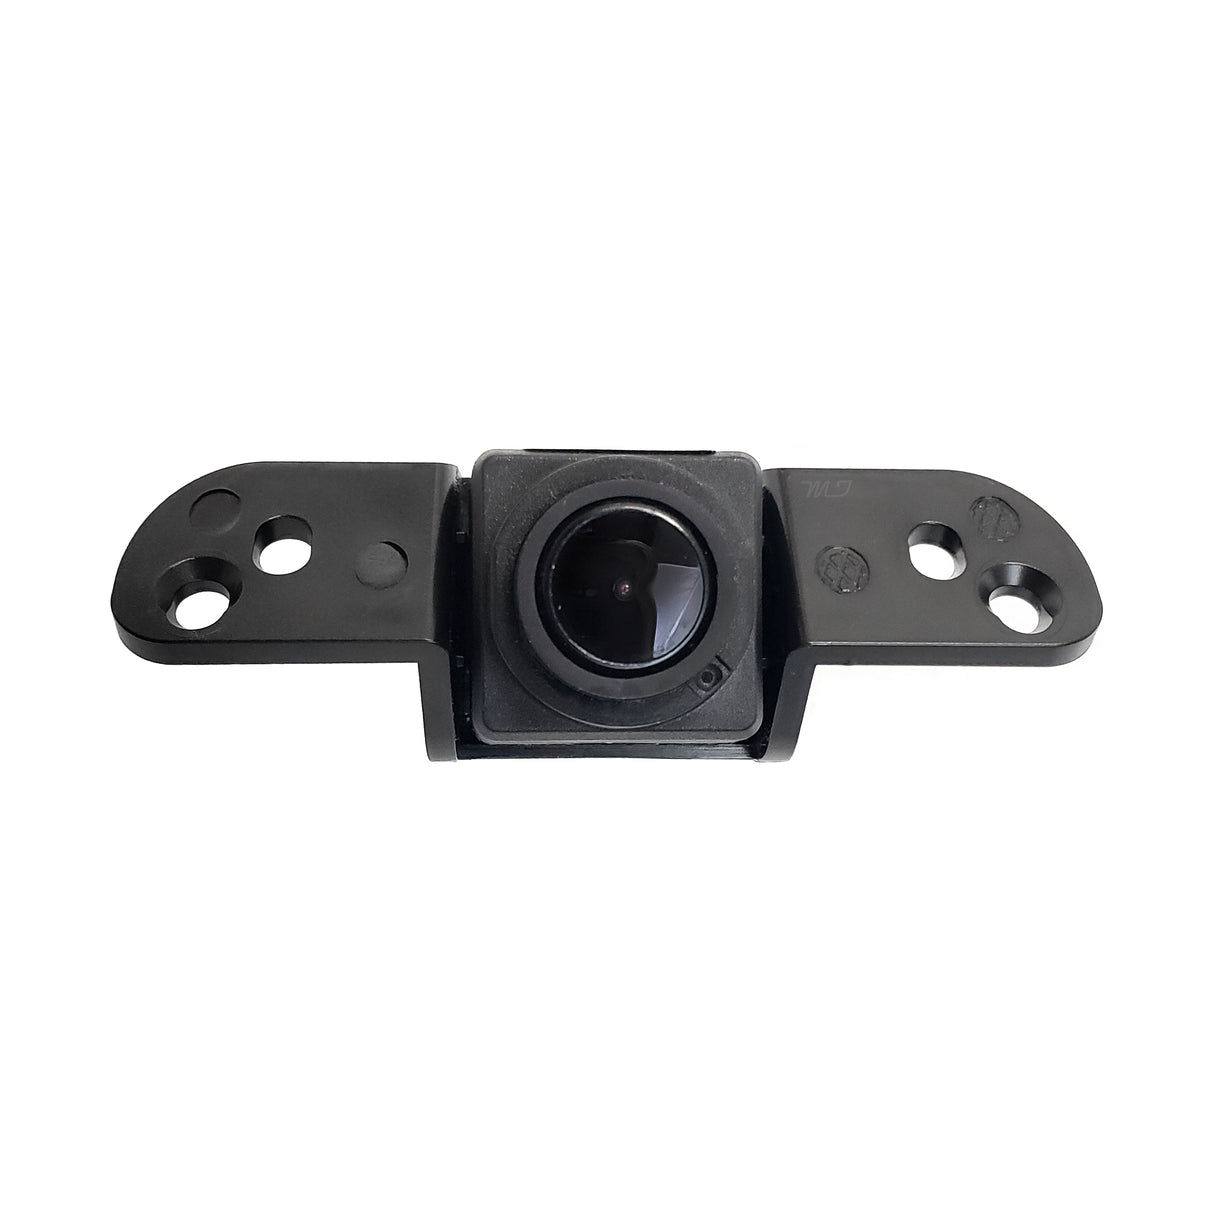 GM Colorado (2017-2019), Canyon (2015-2019) w/o HD RearVision OEM Replacement Backup Camera OE Part # 84143039, 22896940